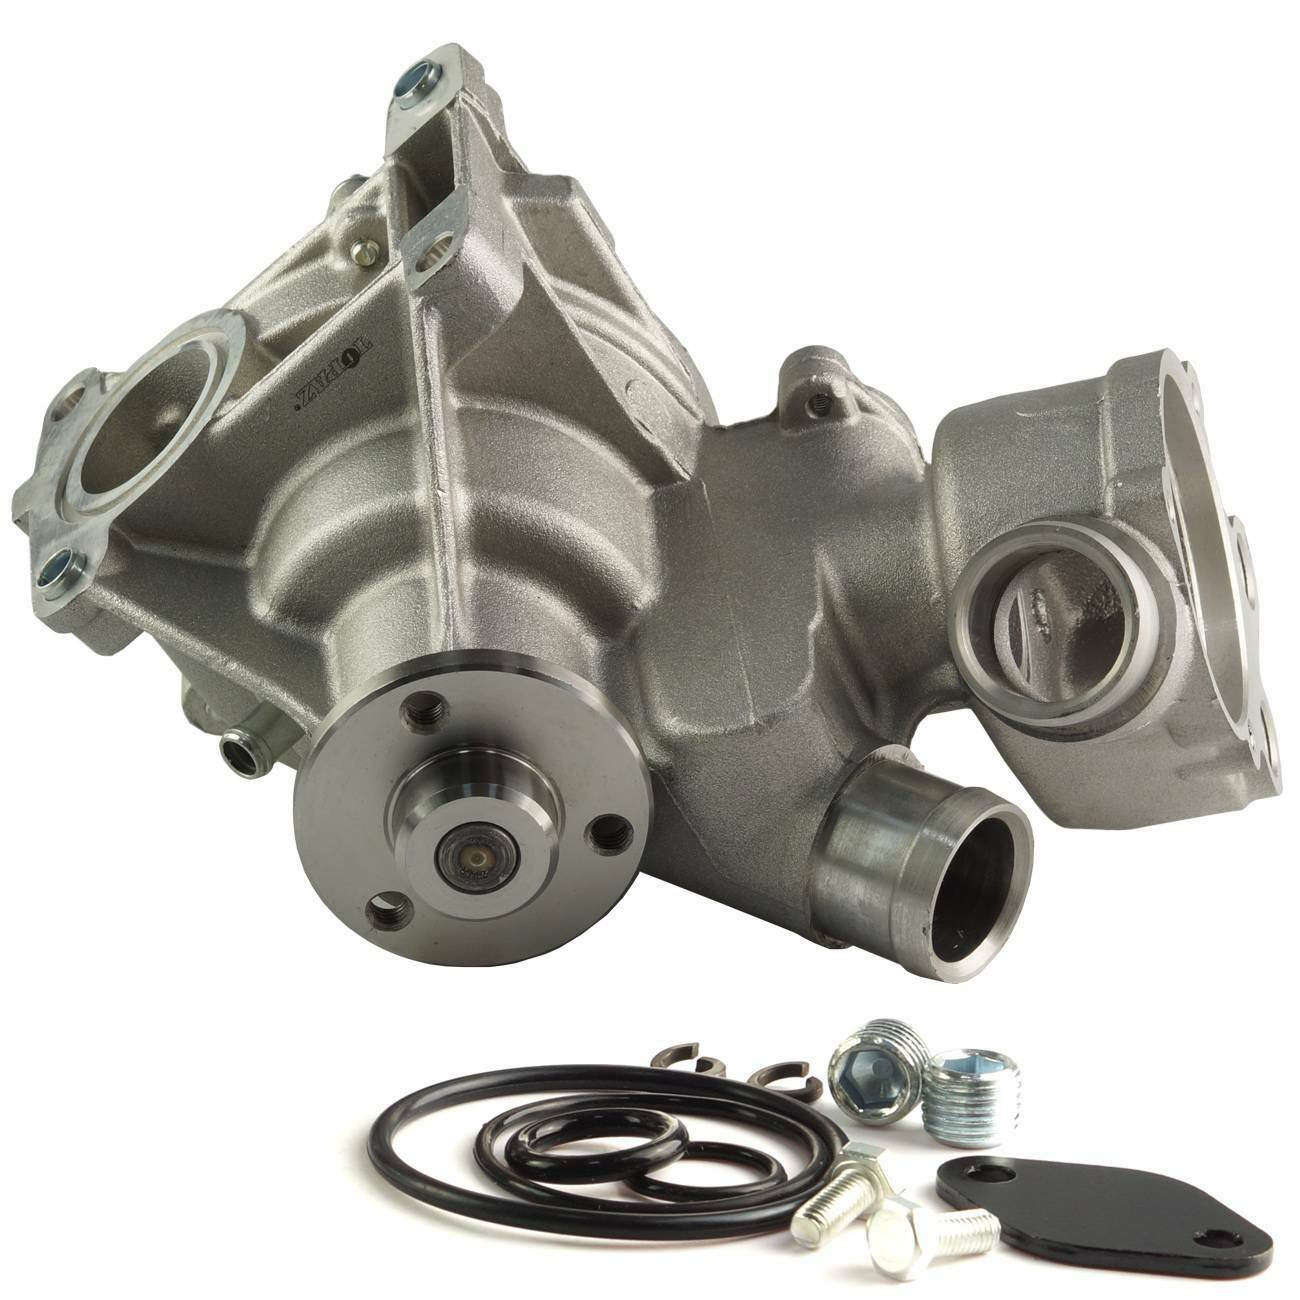 Engine Water Pump Including Cover for Mercedes W140 S280 300 SE 2.8 German Made